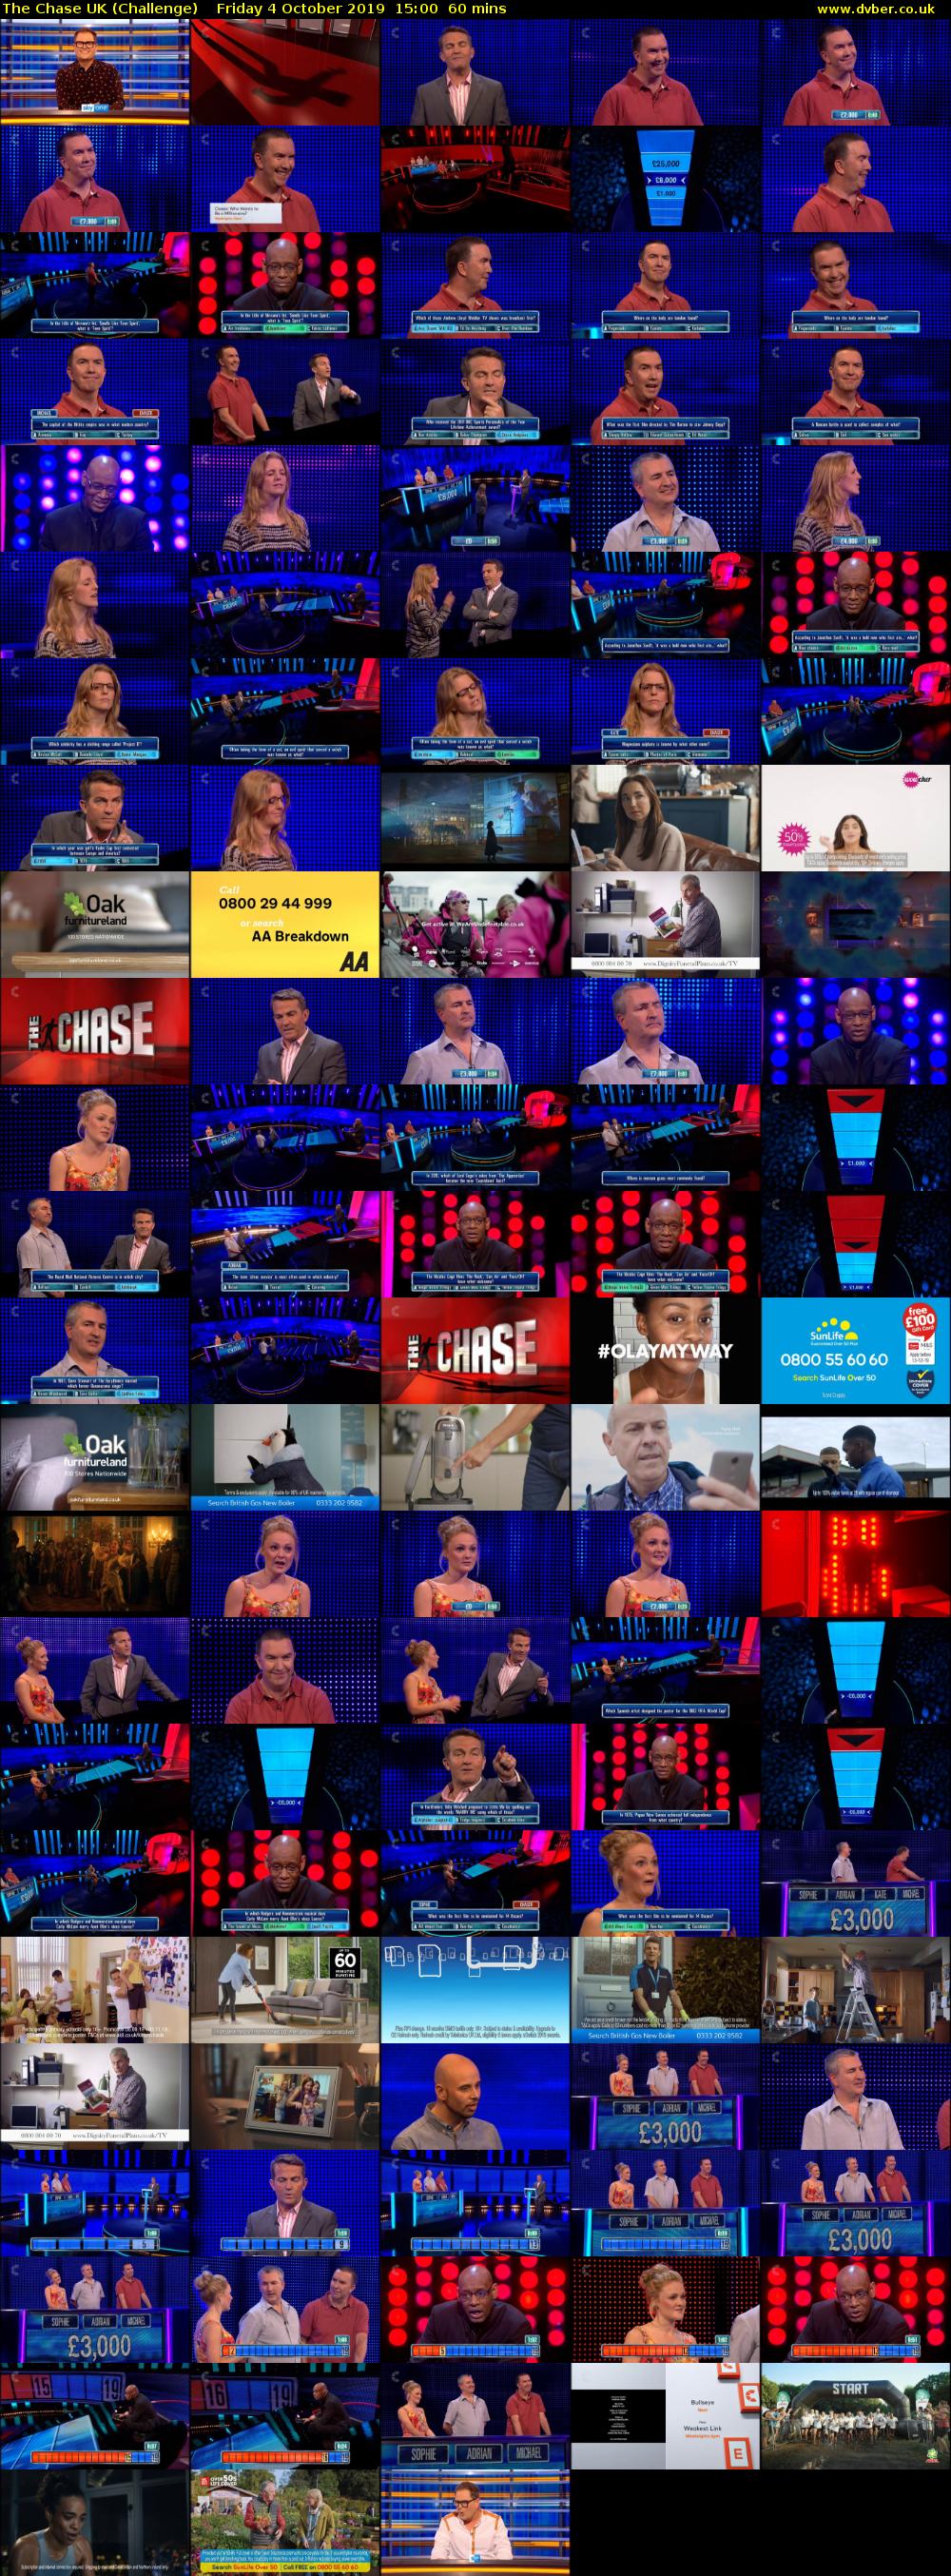 The Chase UK (Challenge) Friday 4 October 2019 15:00 - 16:00